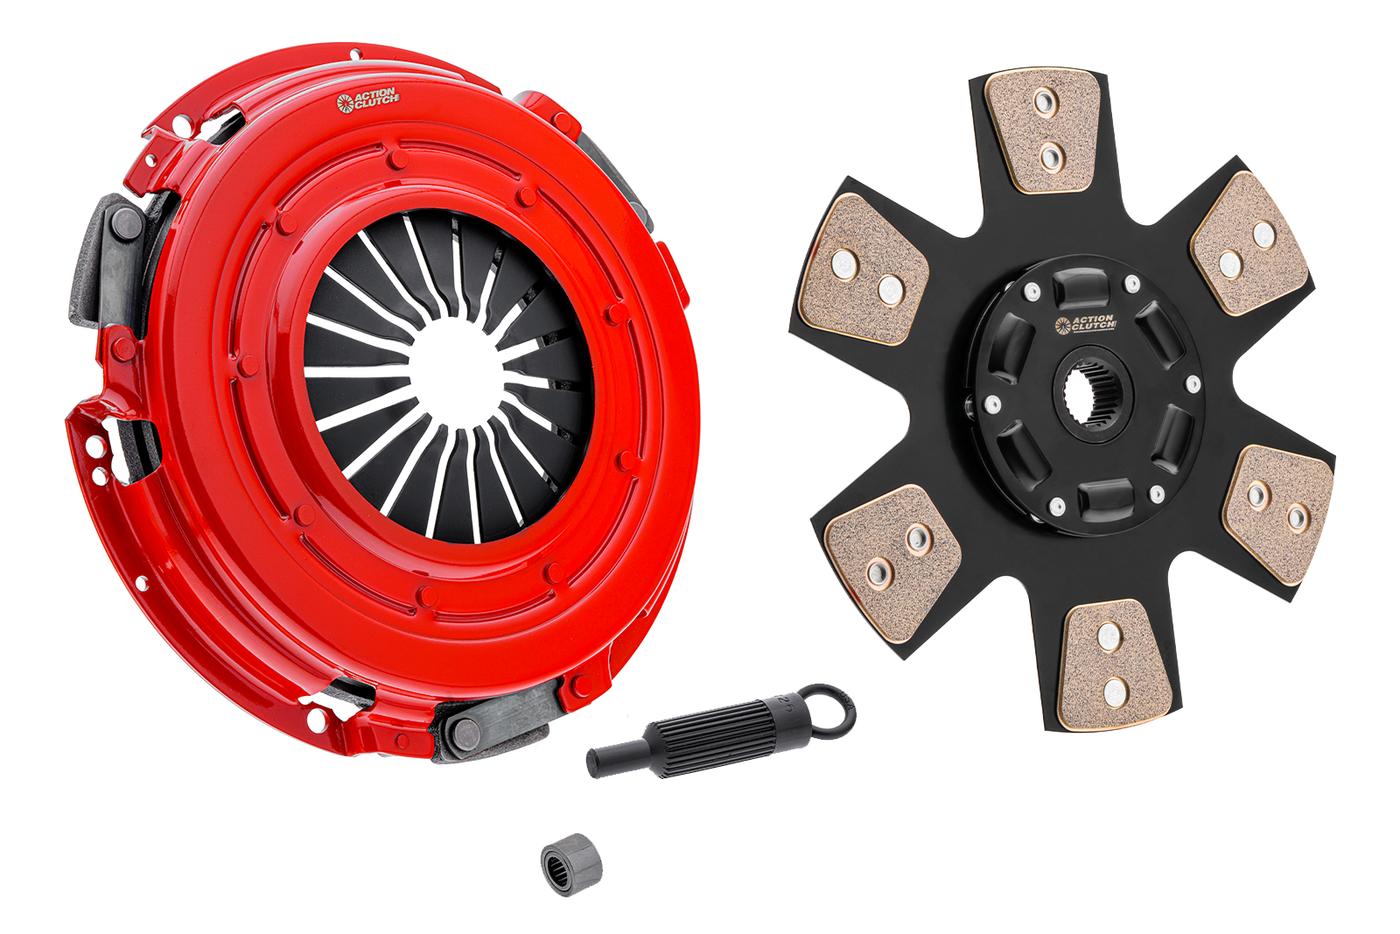 Stage 3 Clutch Kit (1MS) for Pontiac Firebird Firehawk 1998-2002 5.7L (LS1) Without Slave and Release Bearing